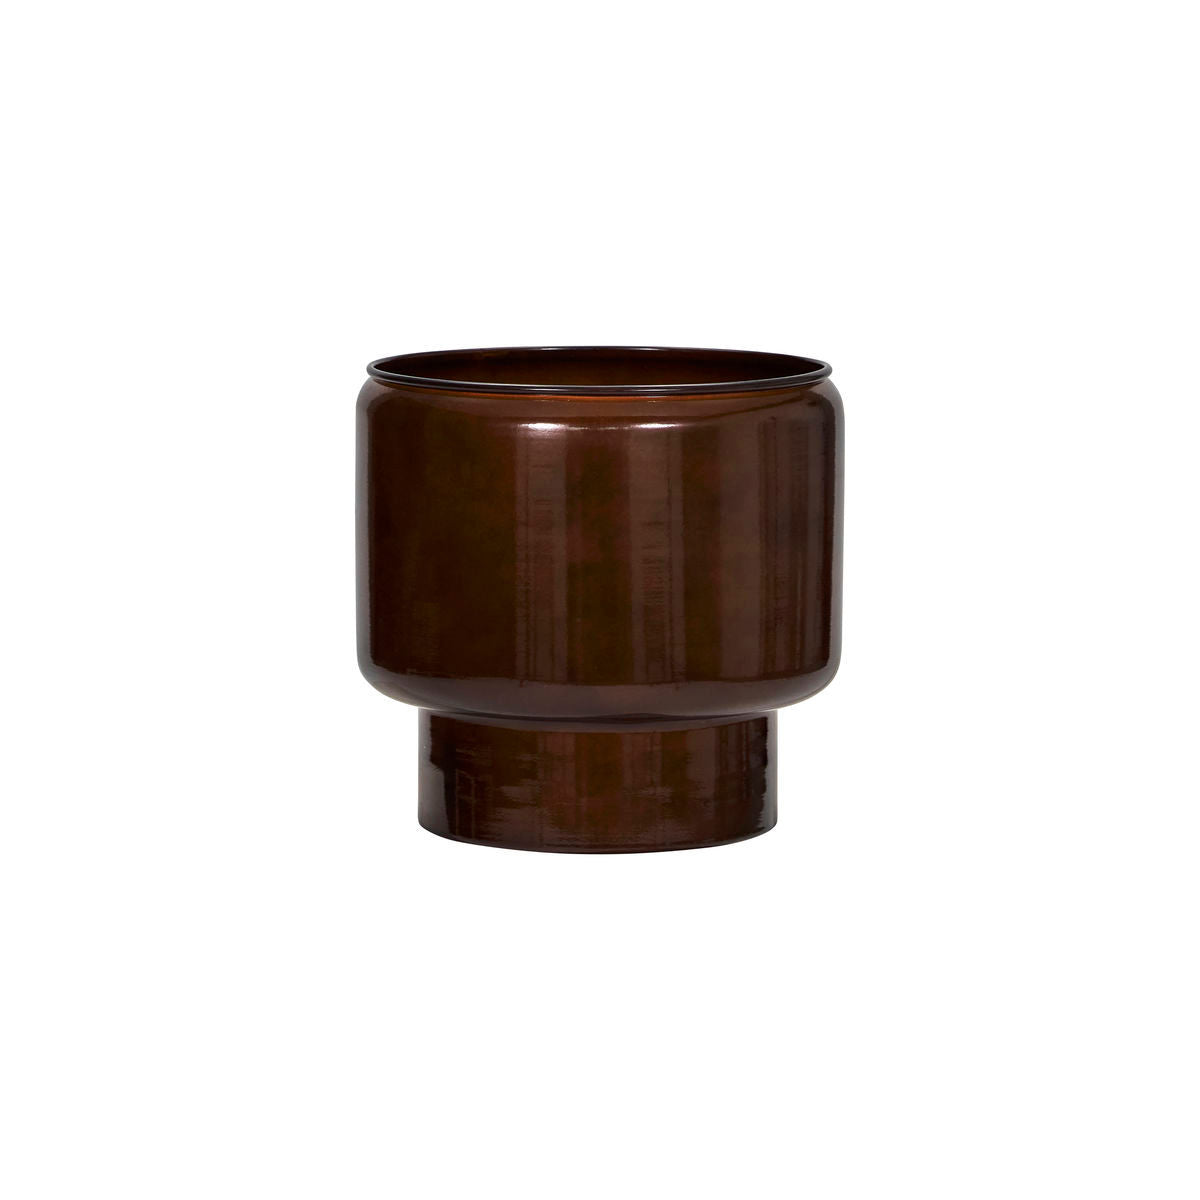 House Doctor herbal pot, hdpile, brown